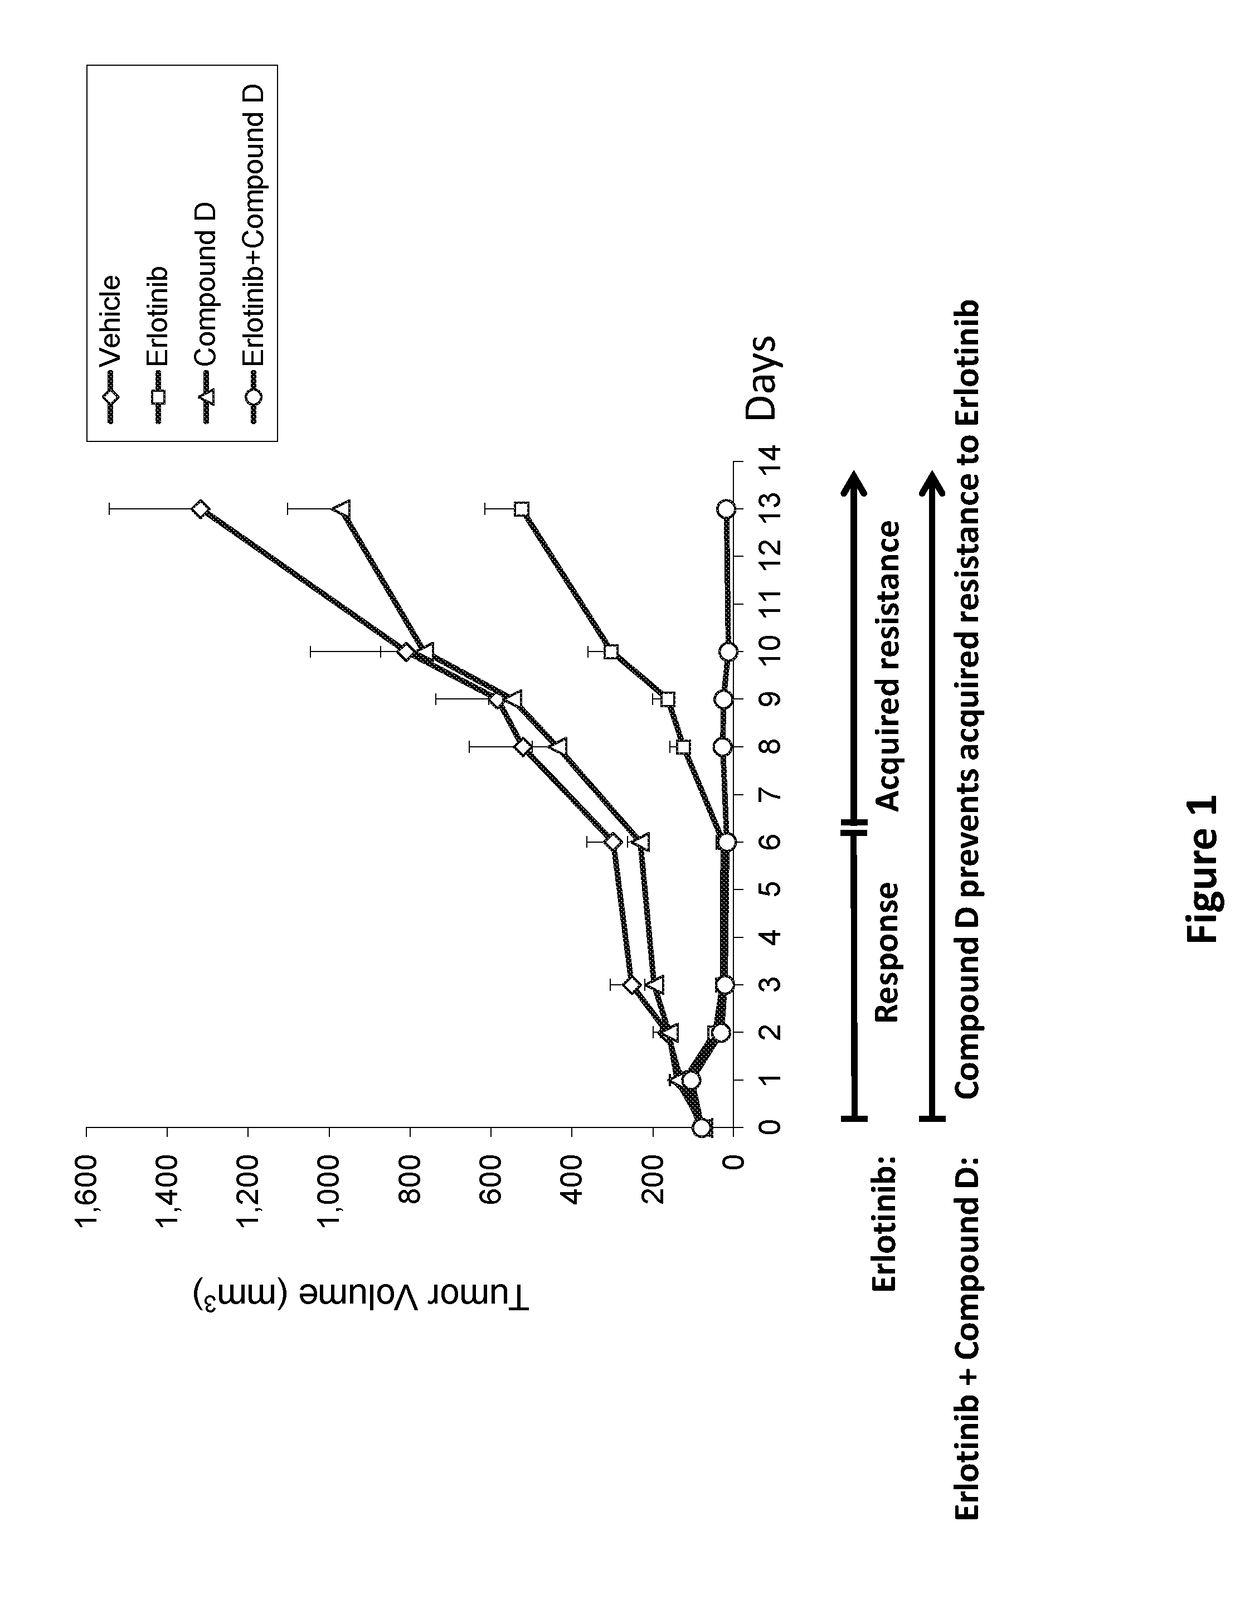 Combinations of irs/stat3 dual modulators and Anti-cancer agents for treating cancer